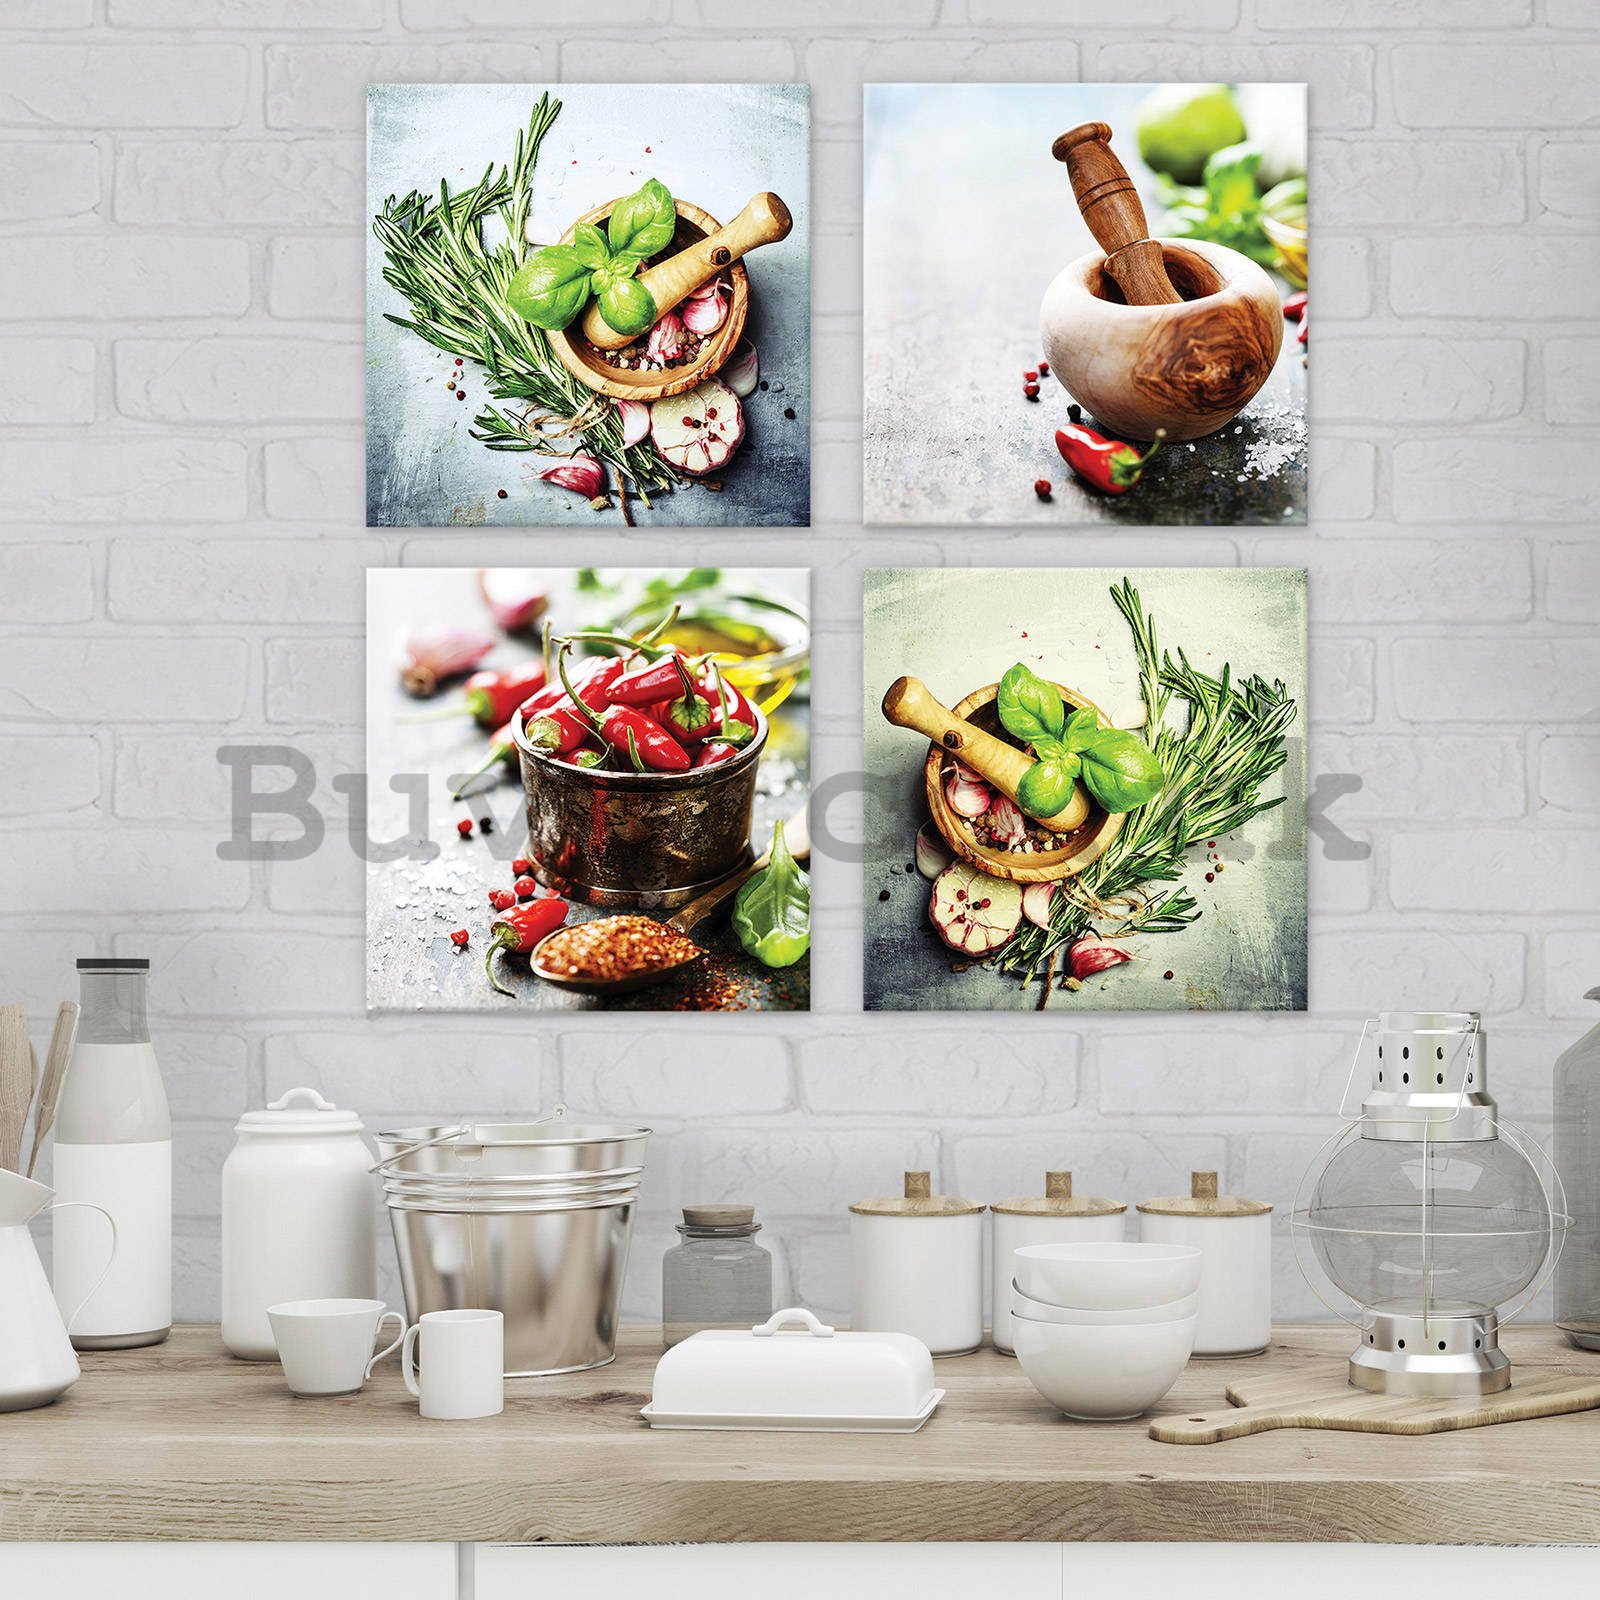 Painting on canvas: Herbs and chili - set 4pcs 25x25cm